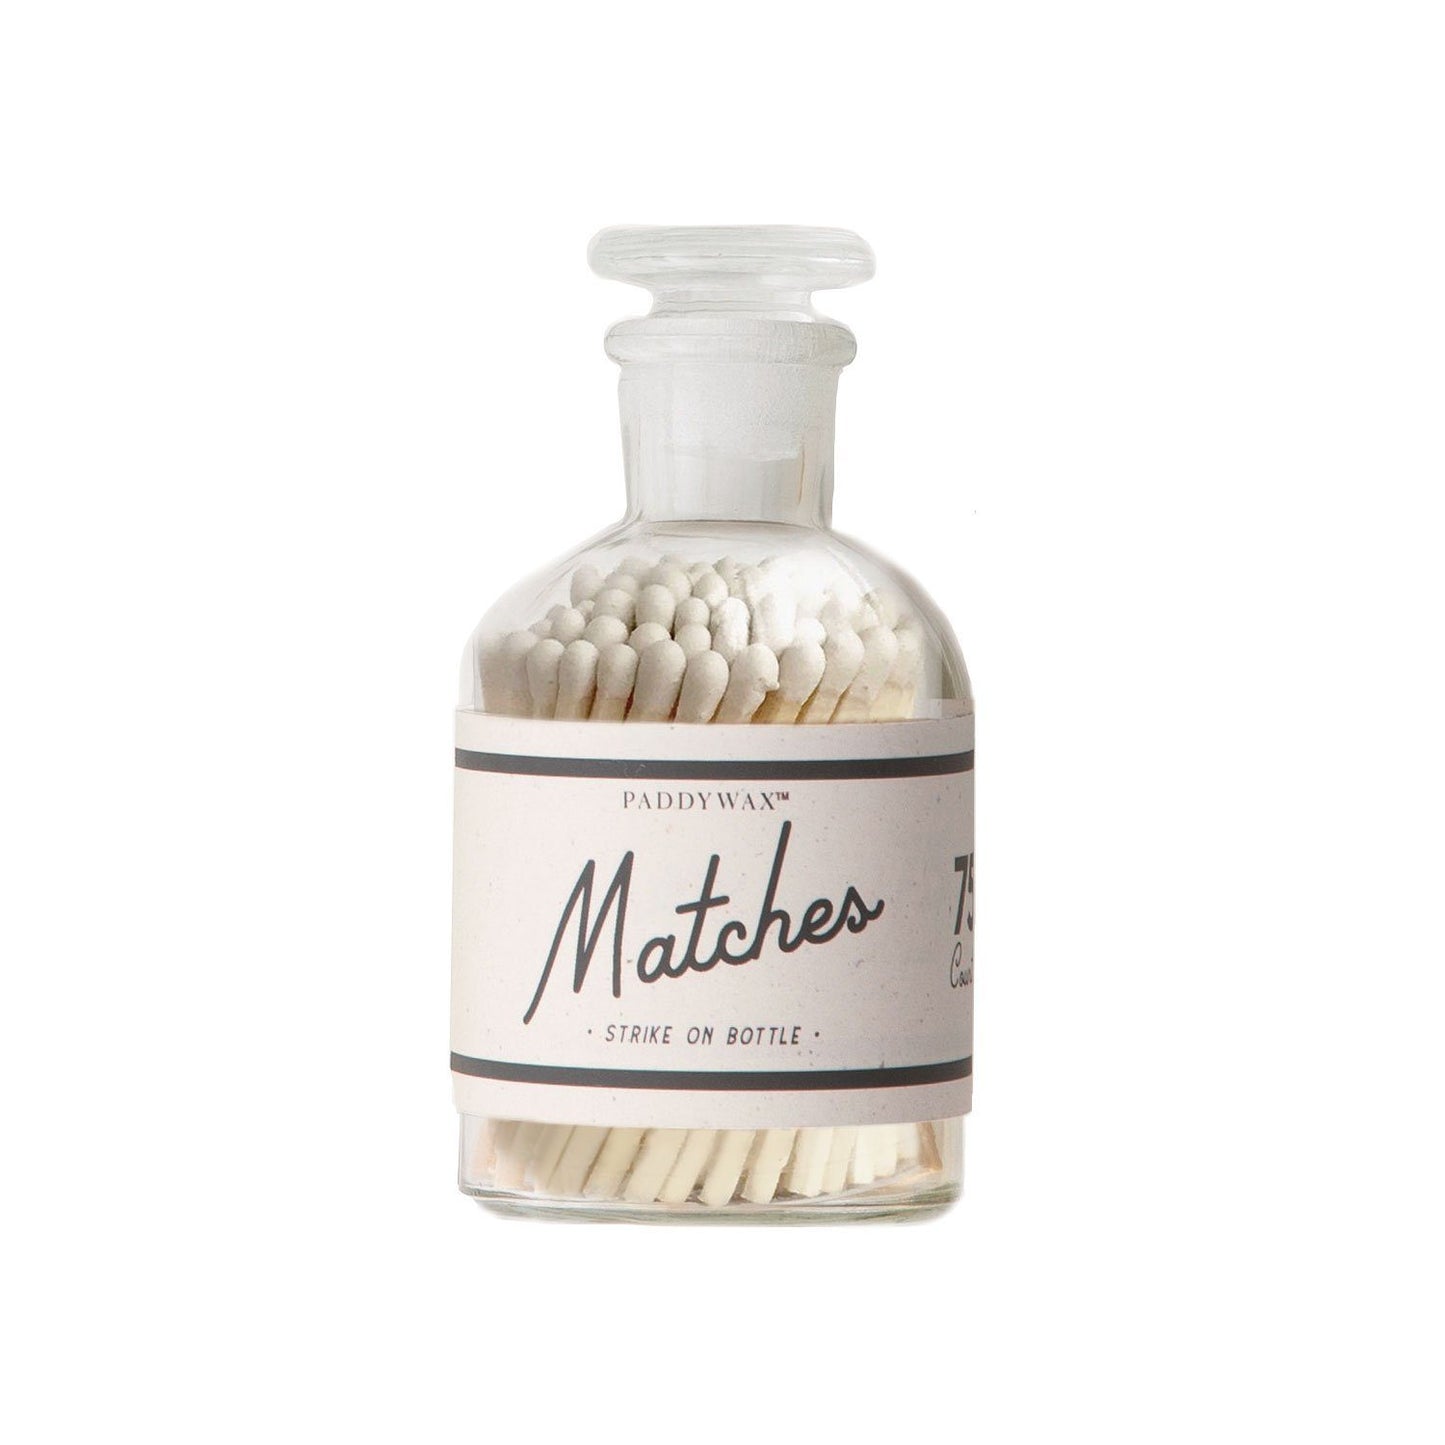 clear glass apothecary-style bottle with white matches label; white matches inside